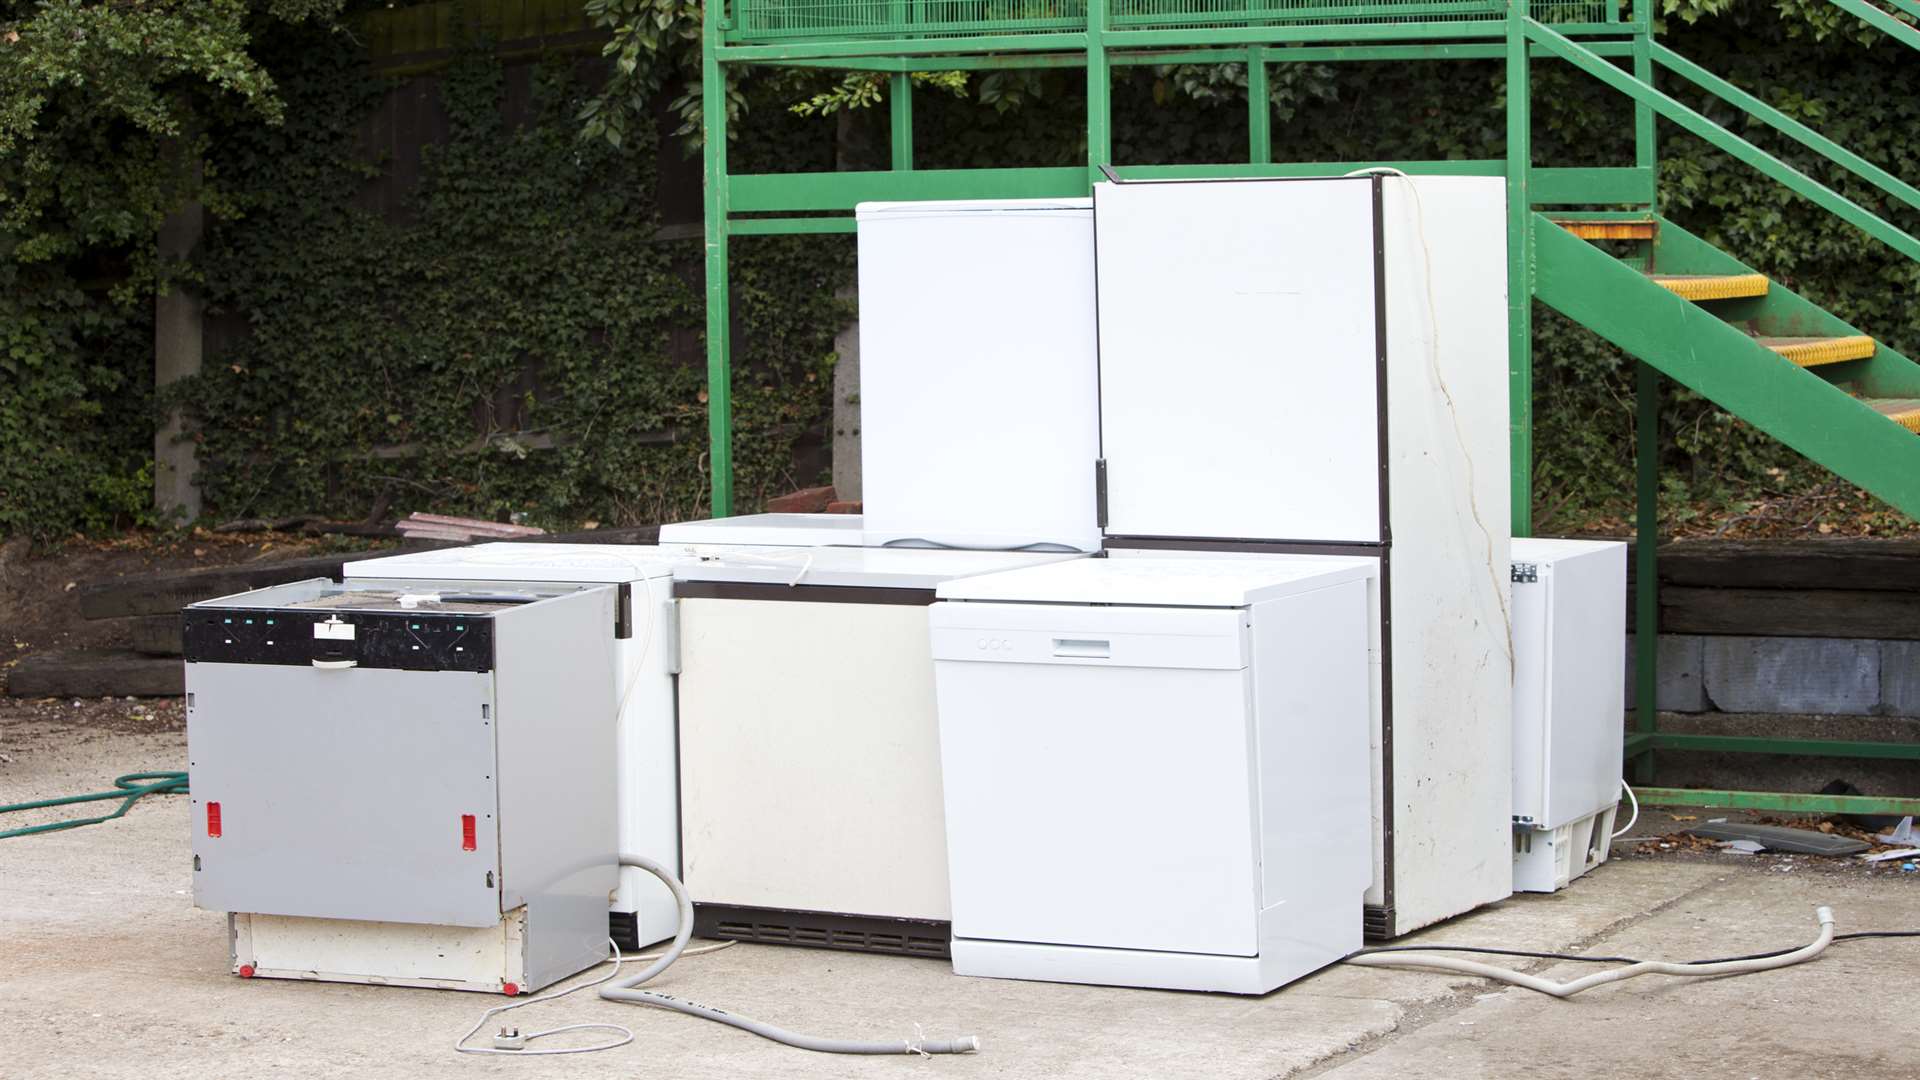 There are strict rules surrounding items like fridges that contain ozone depleting substances